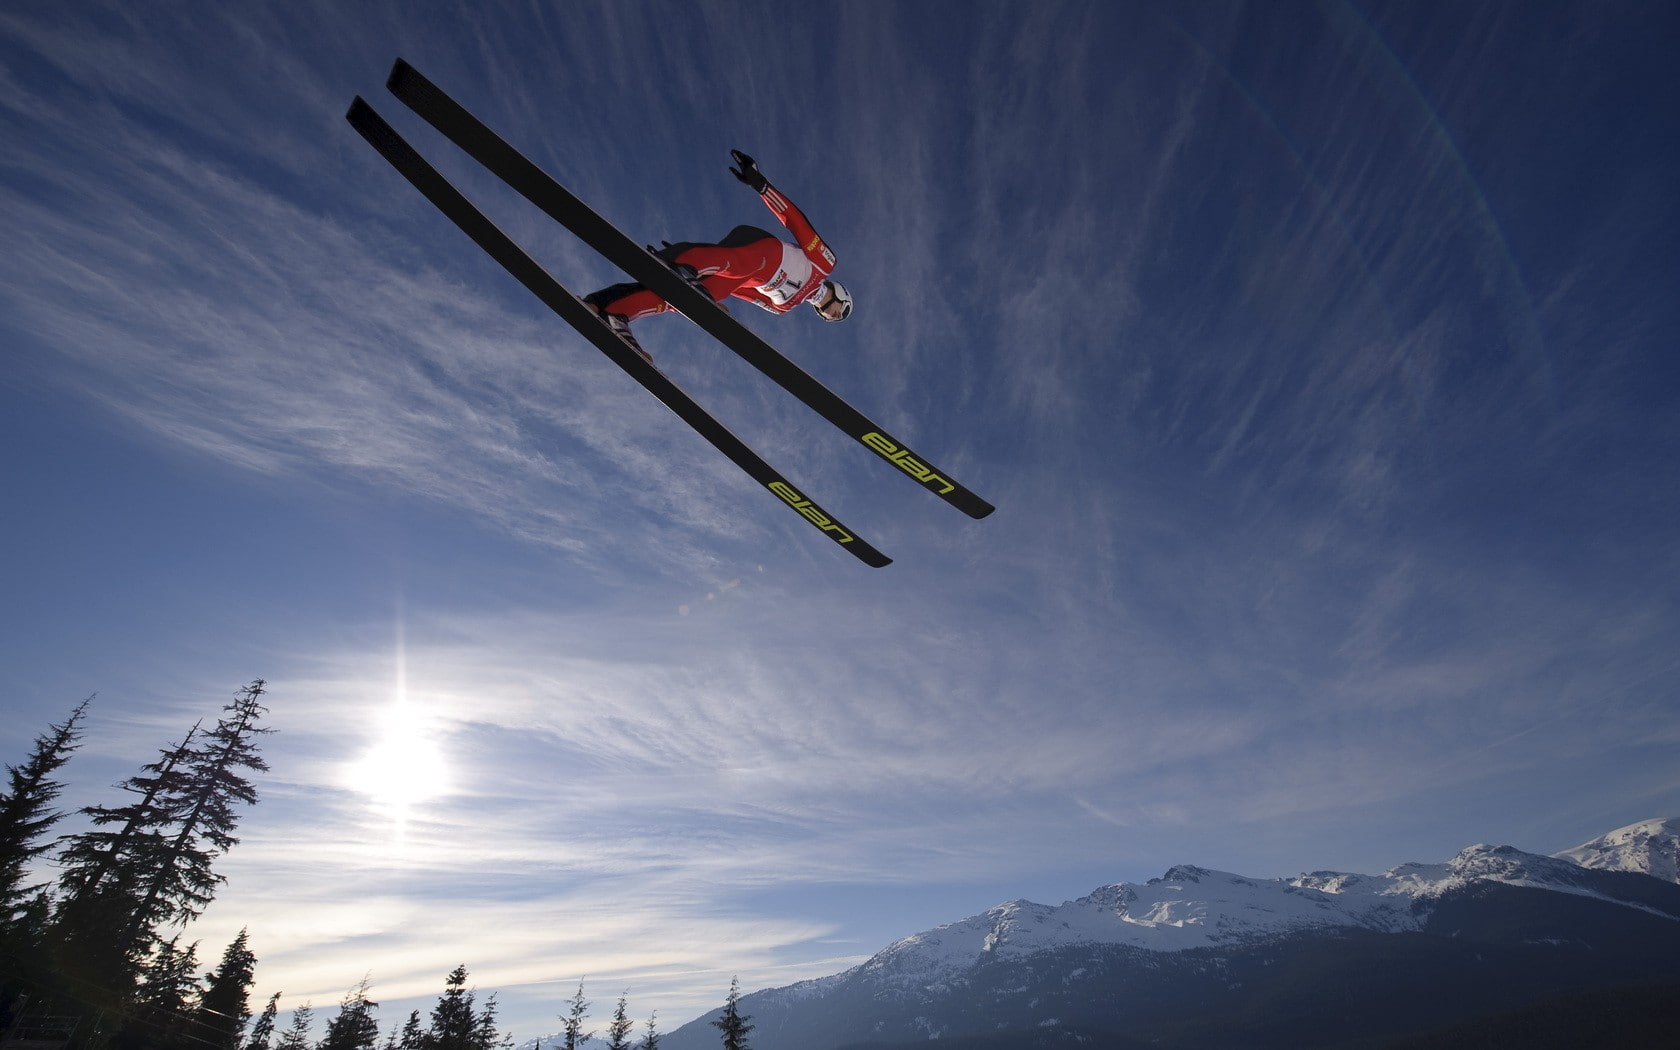 Ski Skiing Jump Stop Action Sunlight HD, man in red overall and black snow skis